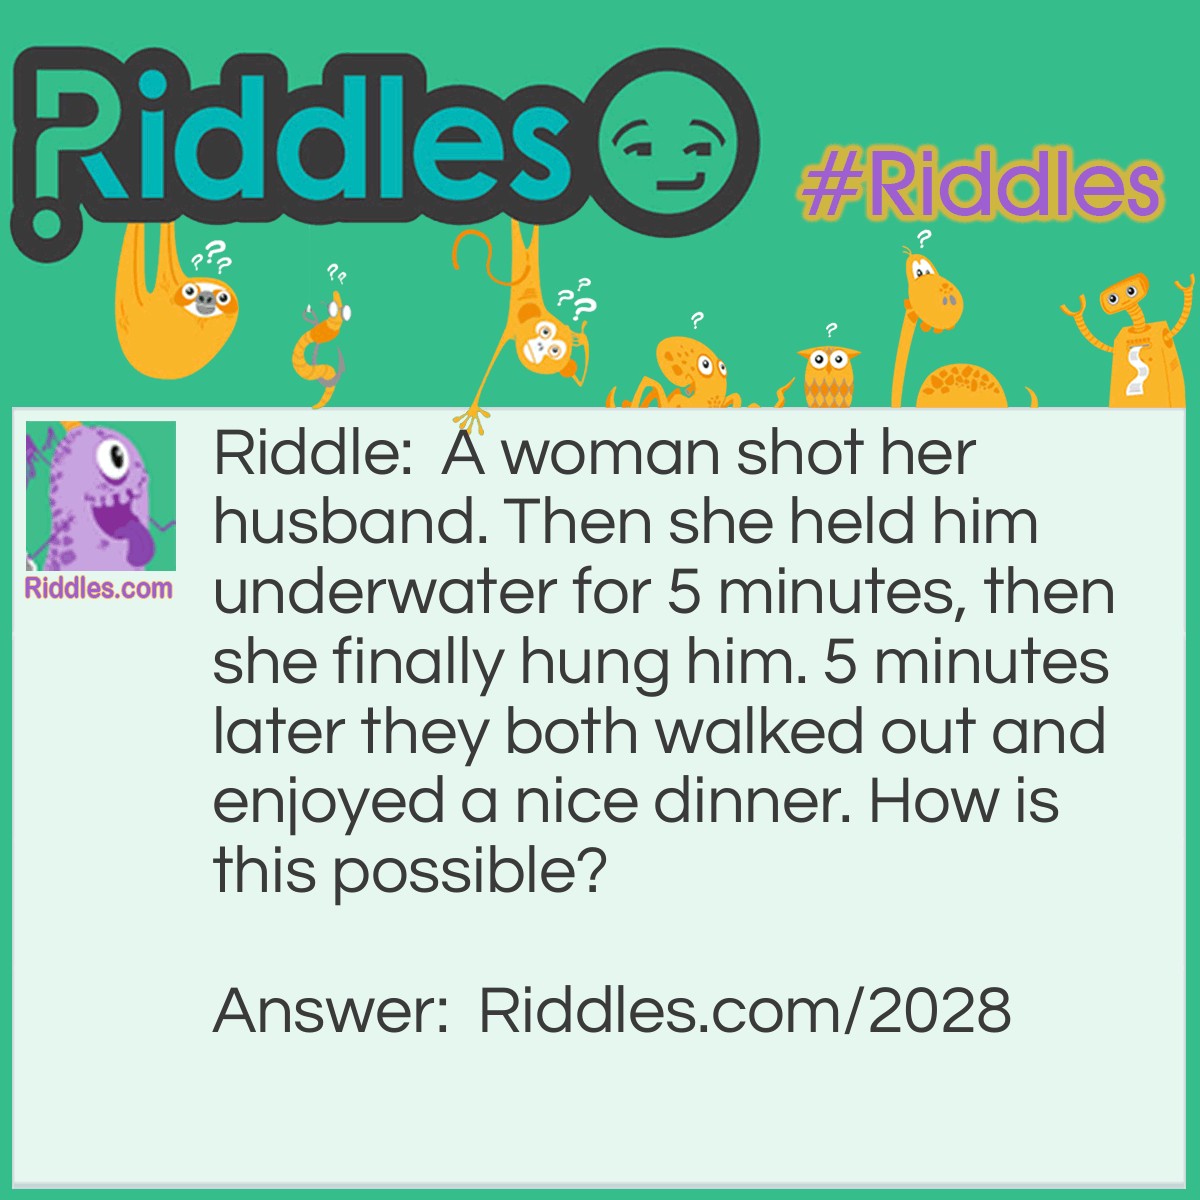 Riddle: A woman shot her husband. Then she held him underwater for 5 minutes, then she finally hung him. 5 minutes later they both walked out and enjoyed a nice dinner. How is this possible? Answer: She was a photographer. She shot a picture of him, devoloped it, then hung it to dry.